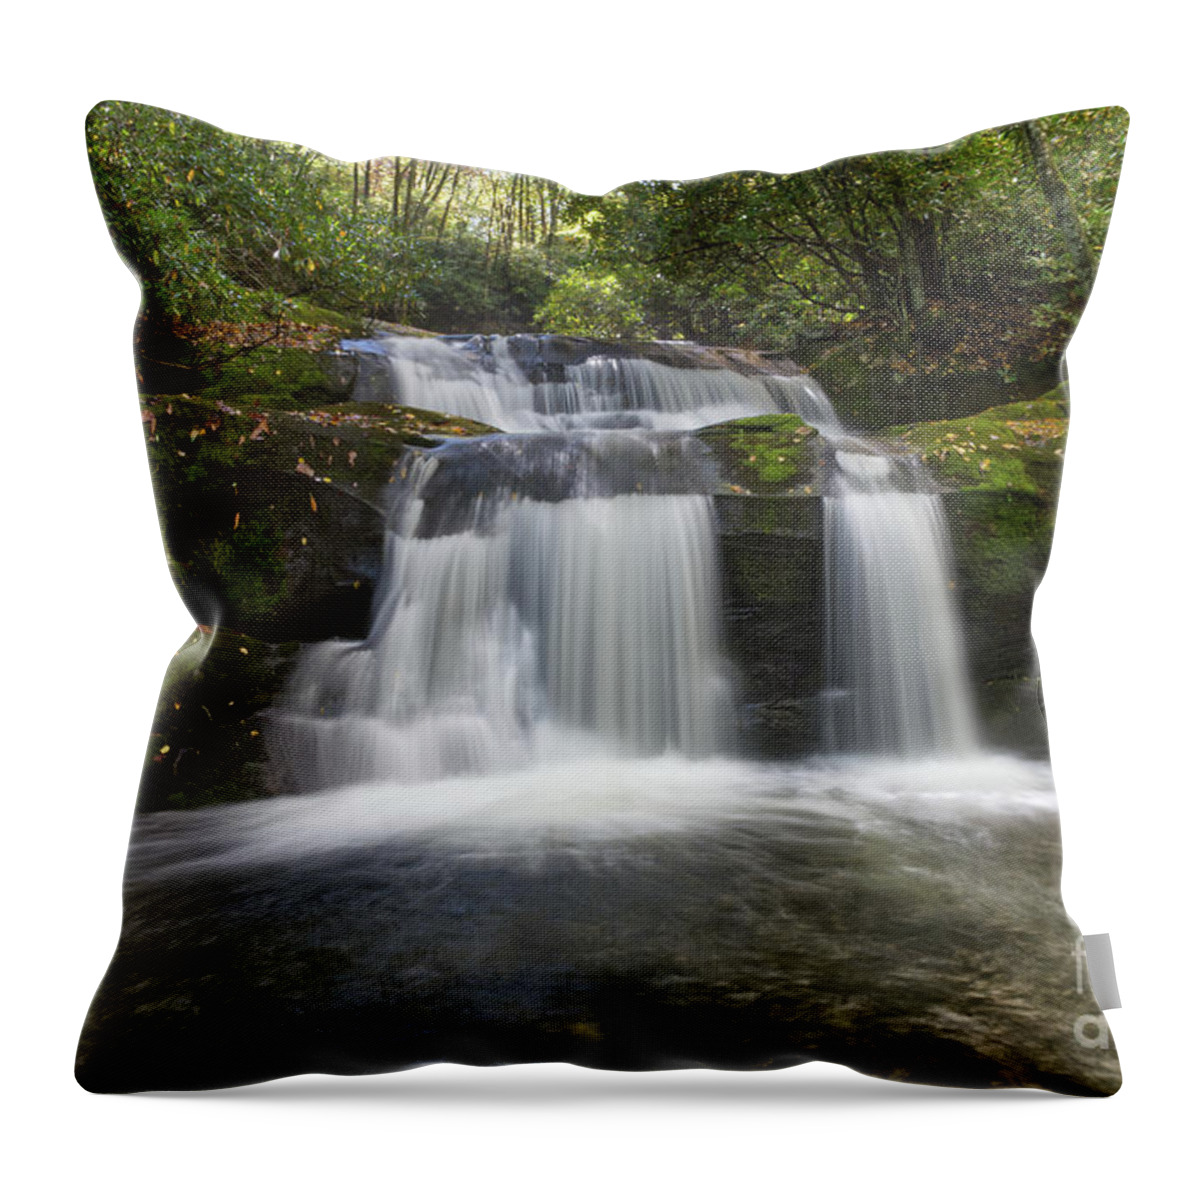 Indian Flats Falls Throw Pillow featuring the photograph Indian Flats Falls 15 by Phil Perkins